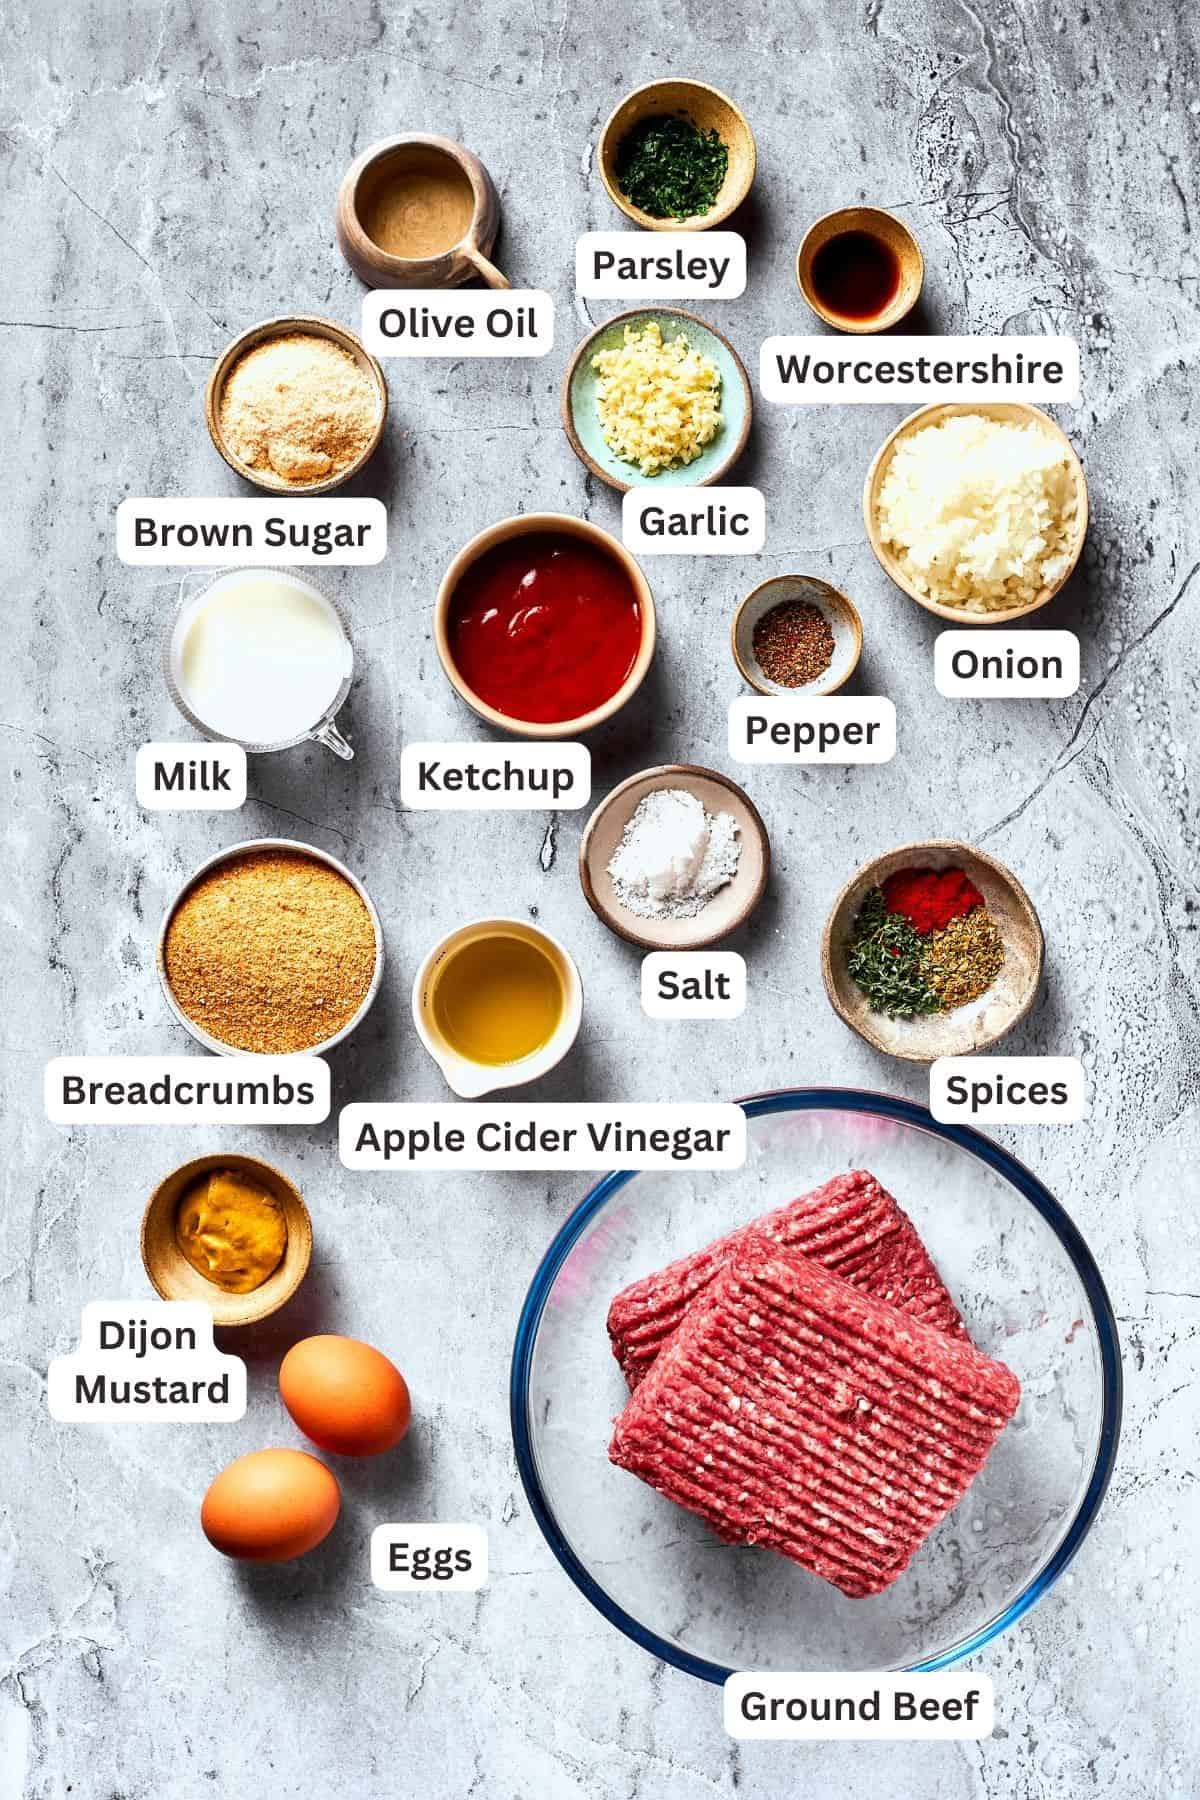 The ingredients for brown sugar meatloaf are shown portioned out: meat, ketchup, brown sugar, apple cider vinegar, salt and pepper, herbs, onion, garlic, breadcrumbs, Worcestershire sauce, eggs, olive oil.